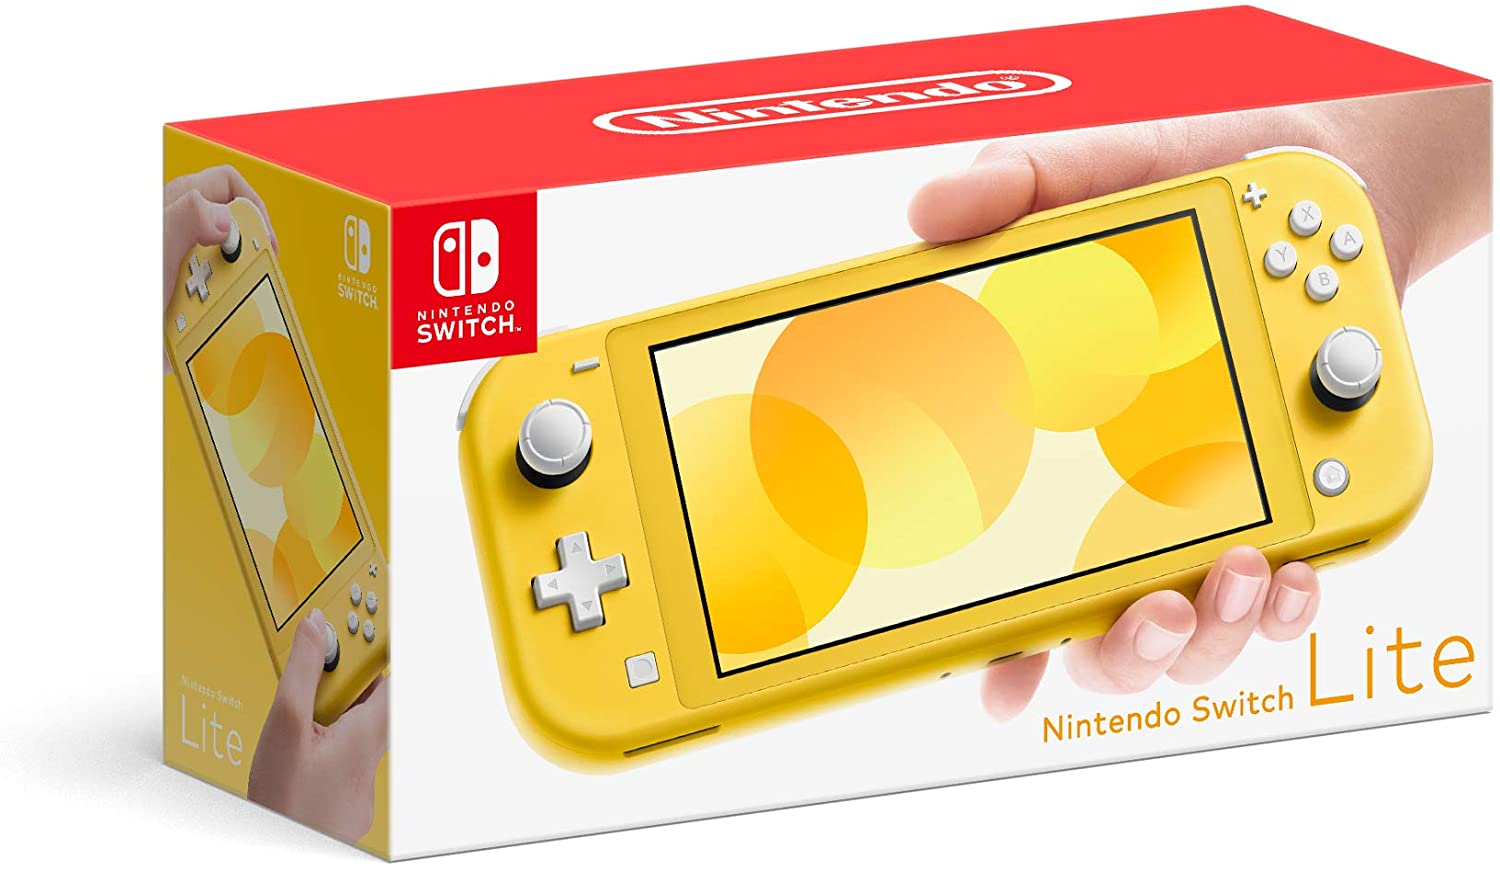 Nintendo Switch Lite was originally released in 2019 for $199, which would be $201.45 in 2020. 